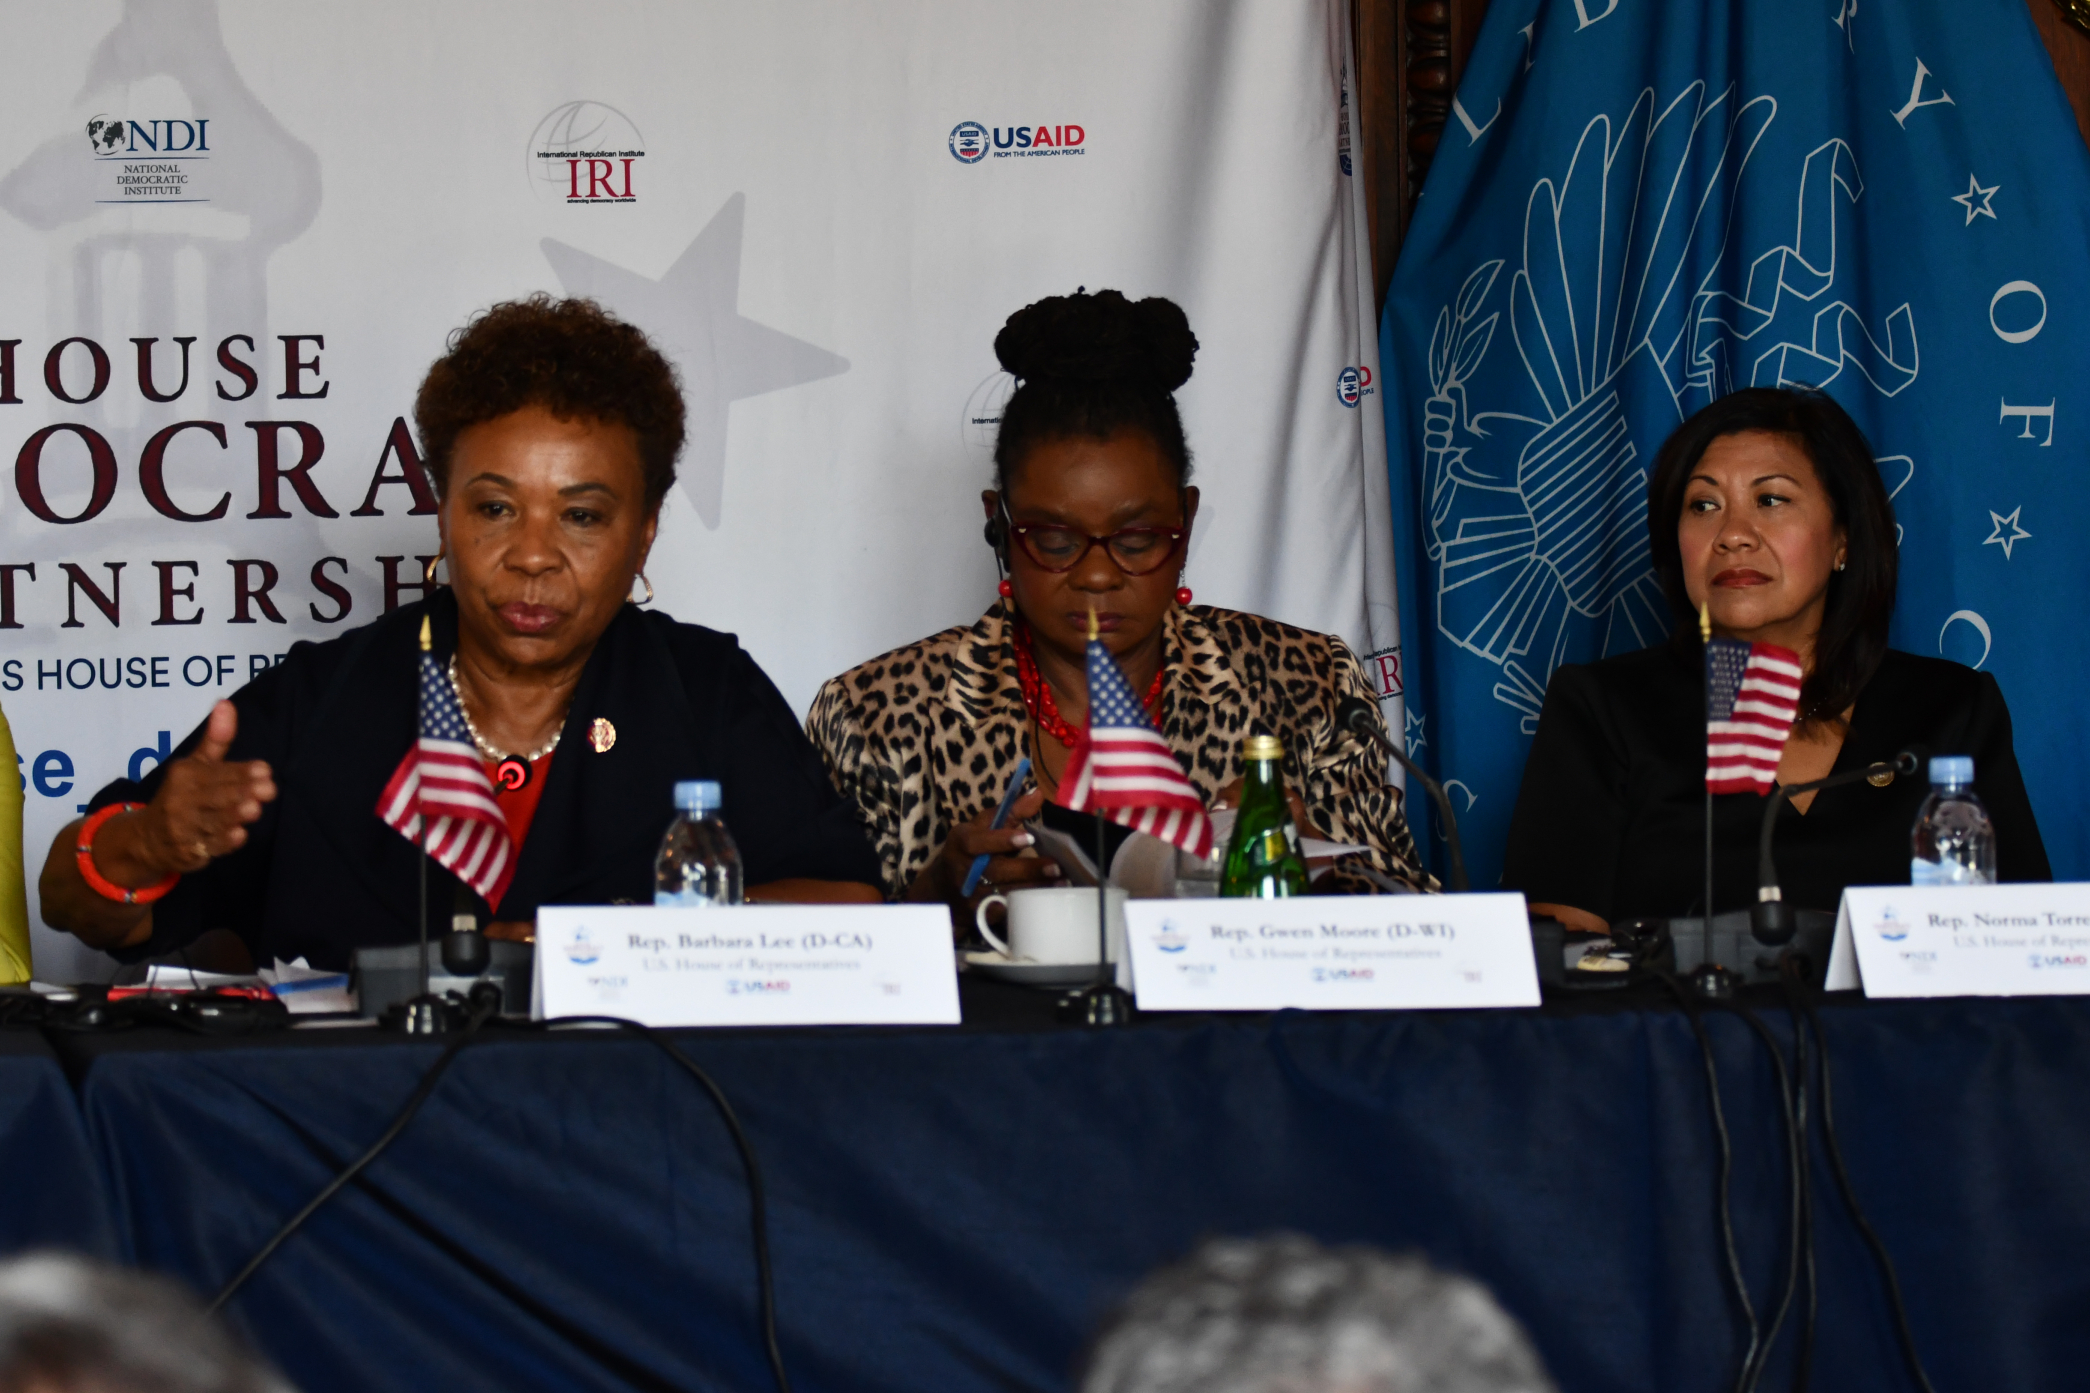 (left-right) U.S. Reps. Barbara Lee (D-CA), Gwen Moore (D-WI), and Norma Tores (D-CA) participate in a panel on building resilient and responsive governance through techniques for mainstreaming gender and stopping violence against women.